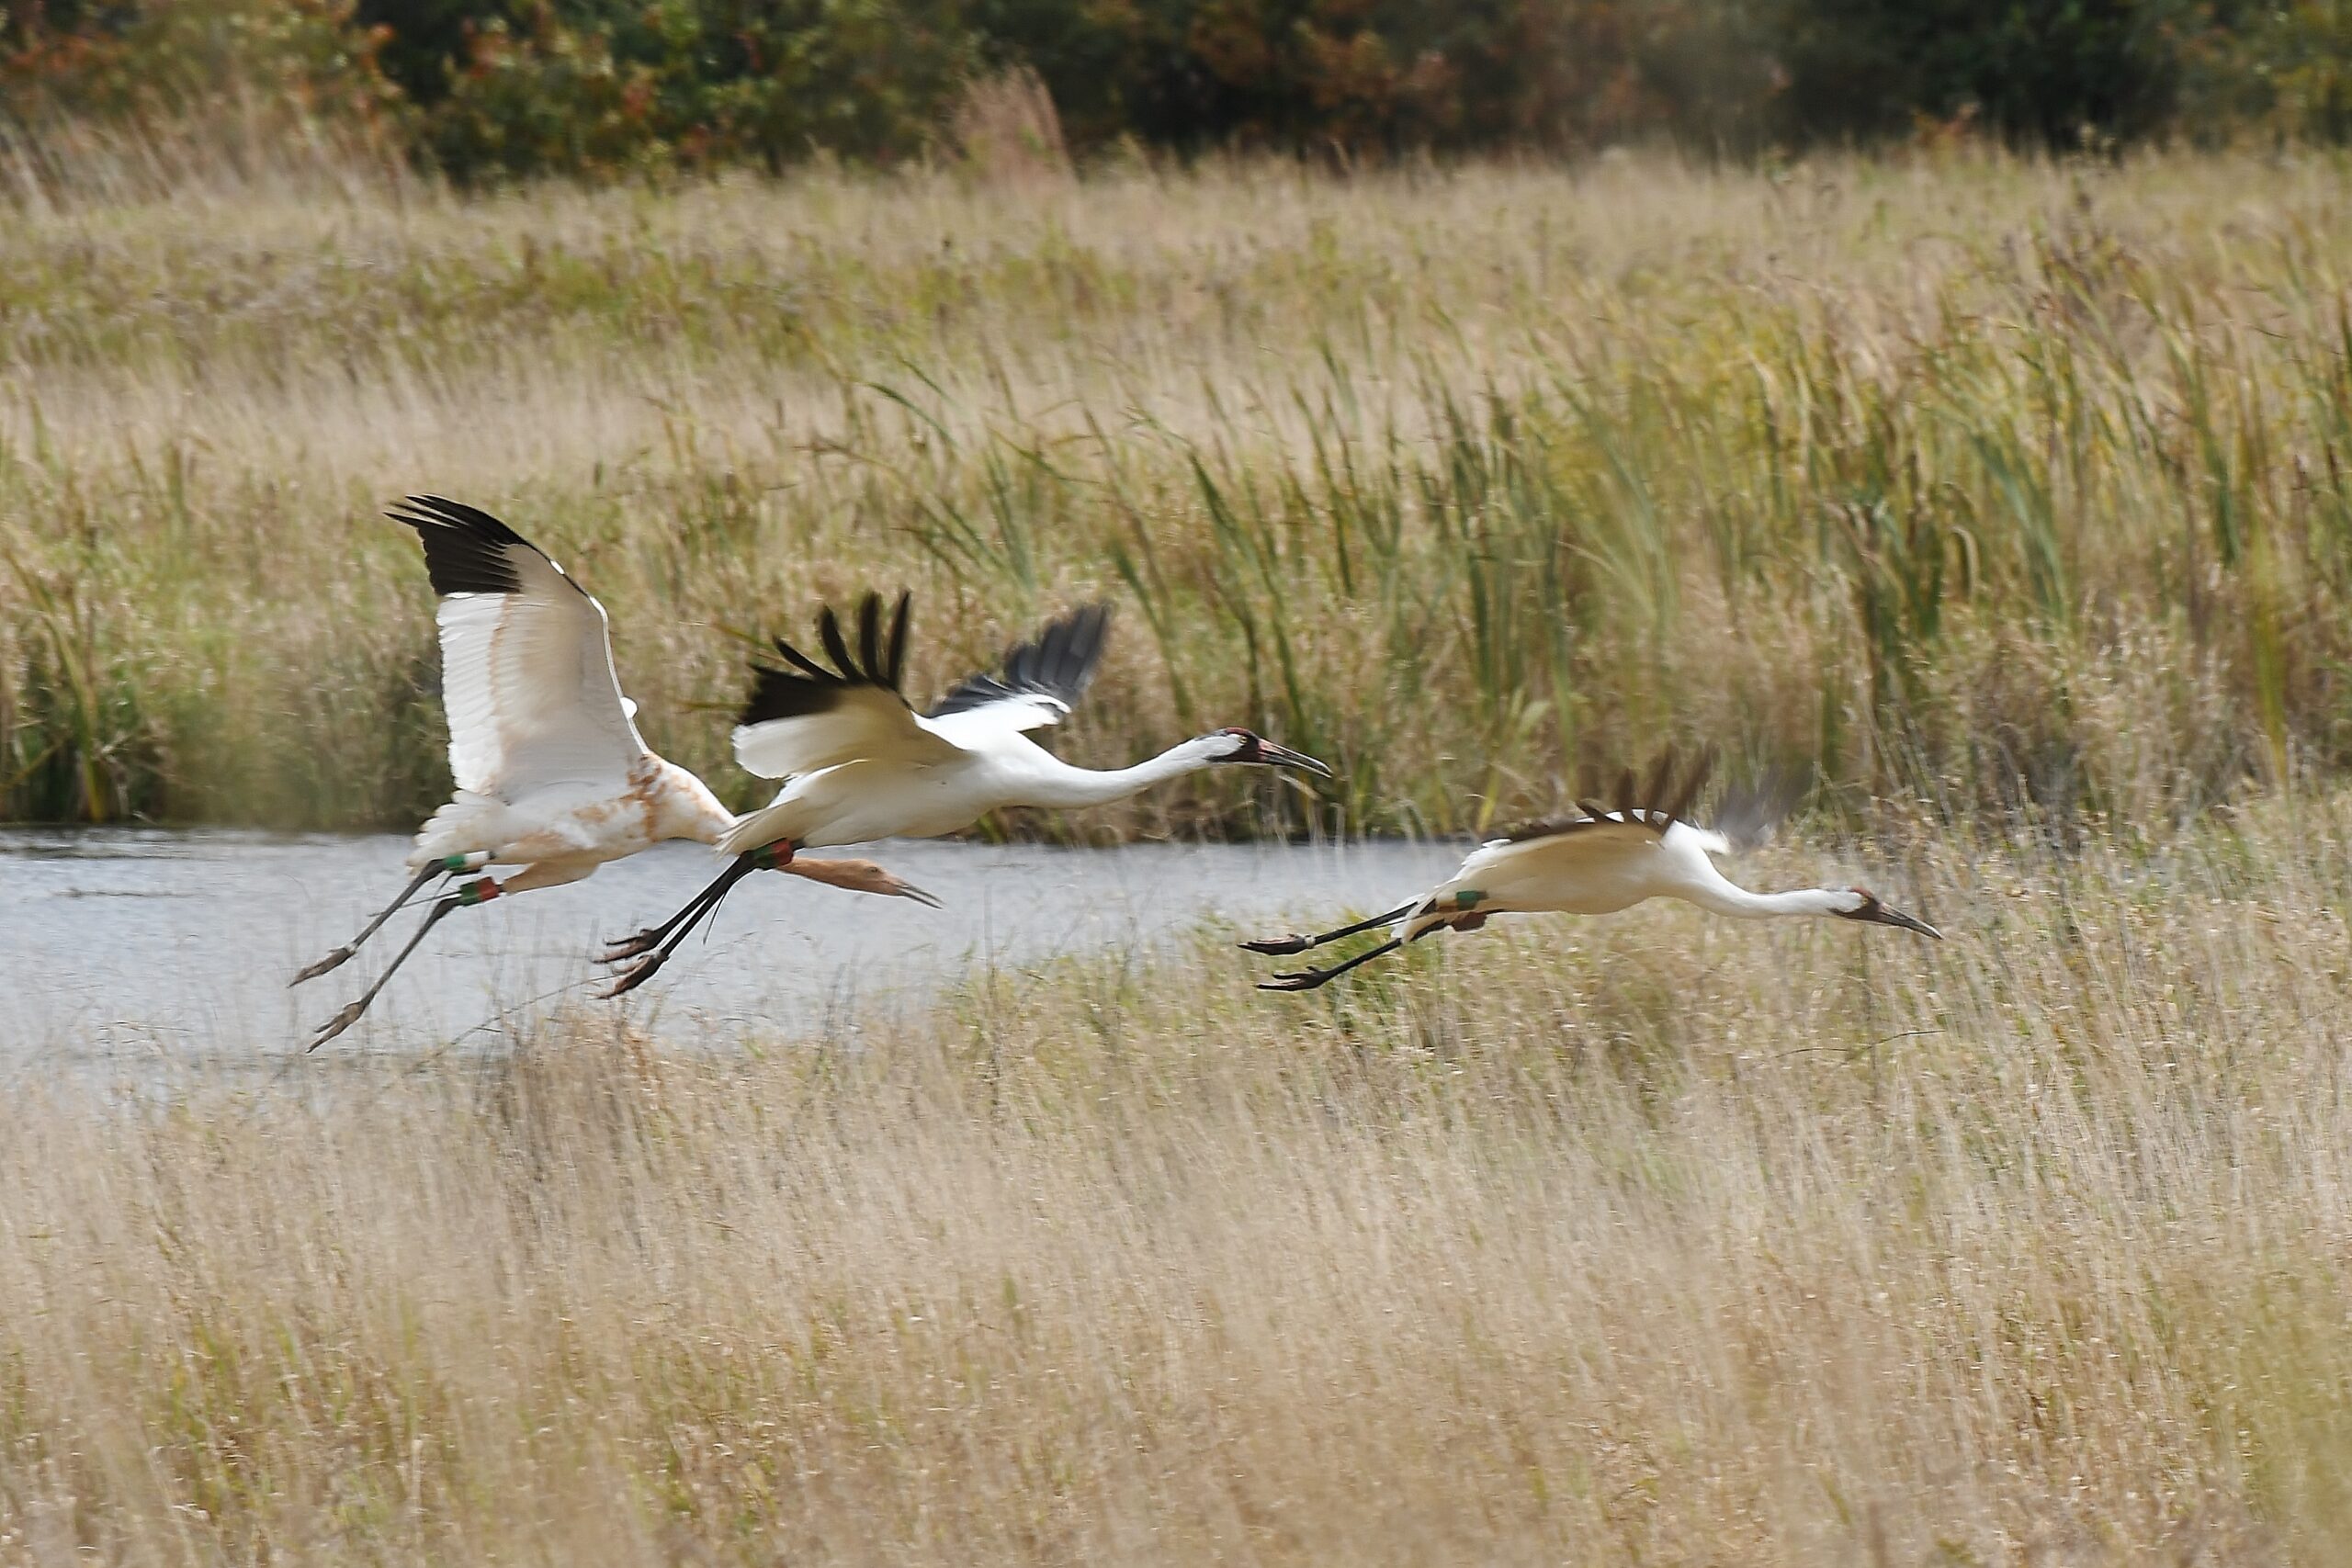 Two adult and one juvenile Whooping Crane fly over a marsh.